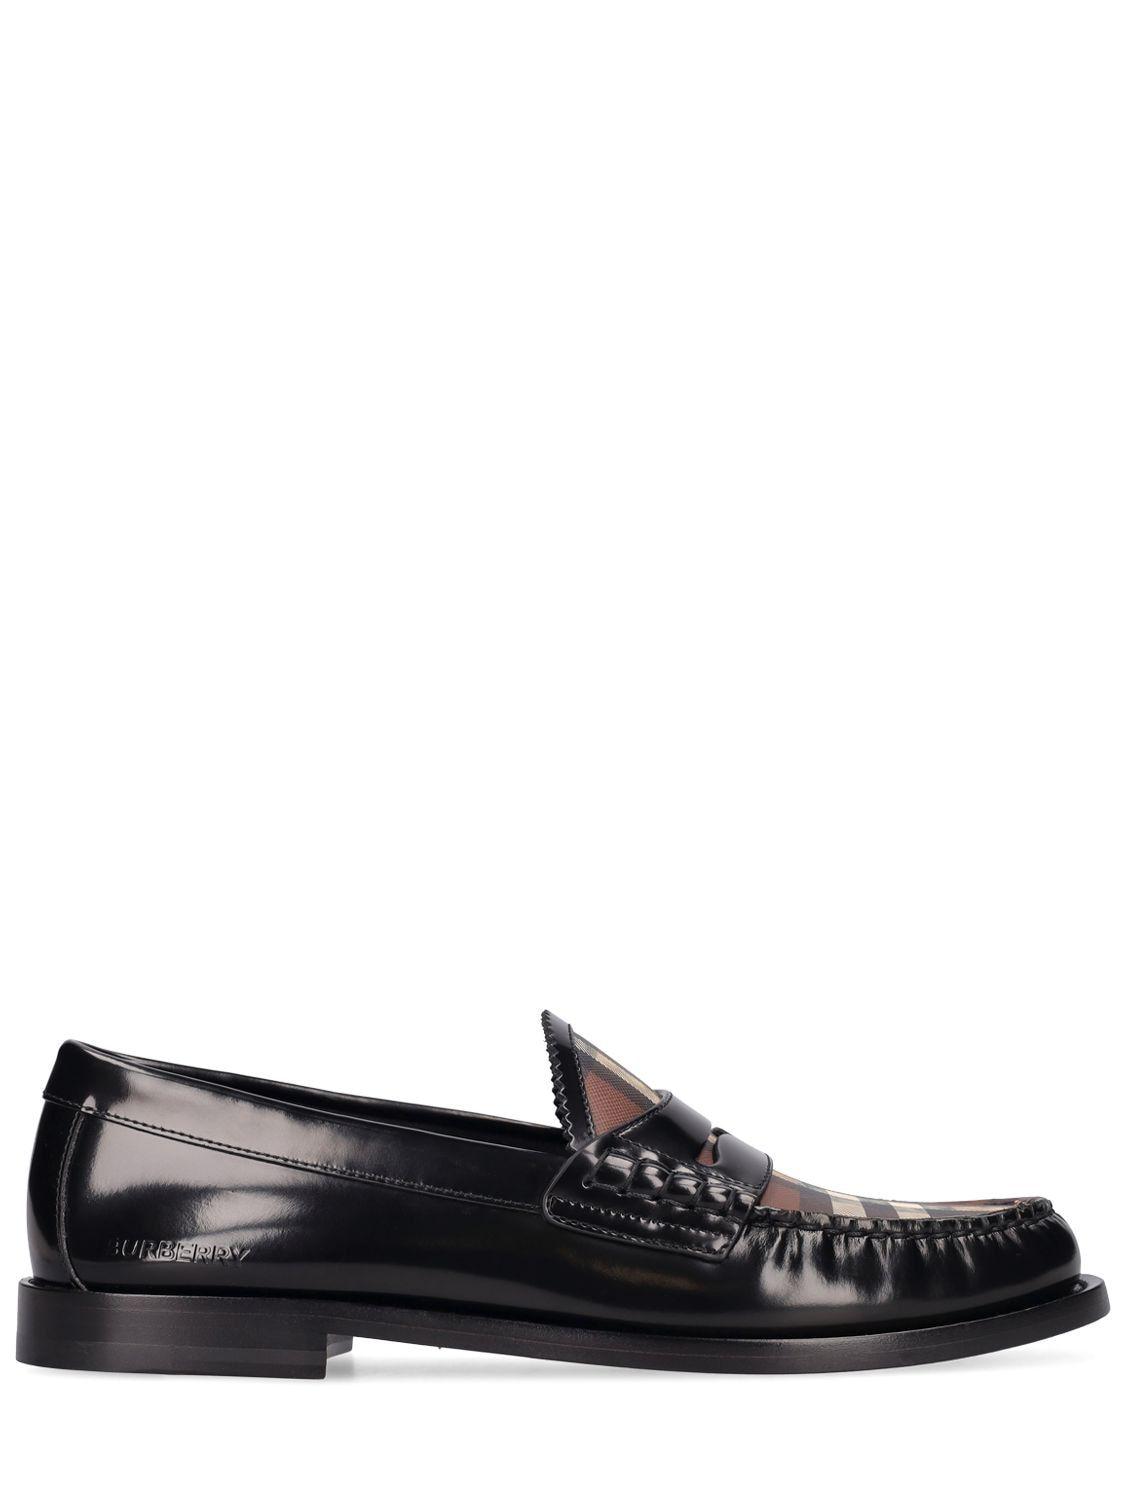 Burberry Shane Grain Leather & Check Loafers in Black for Men | Lyst